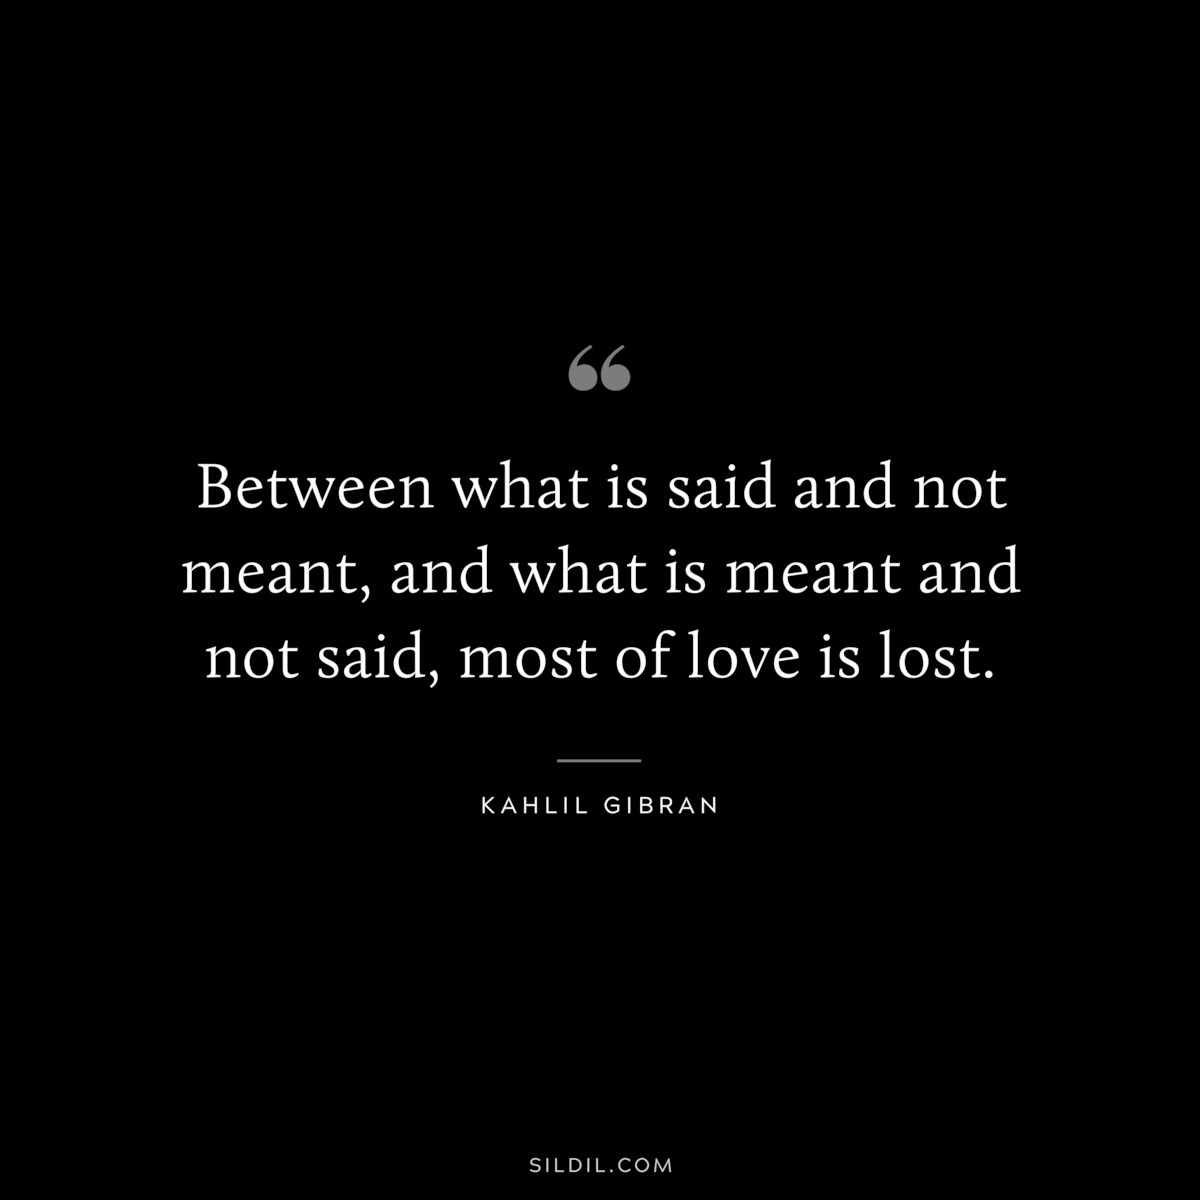 Between what is said and not meant, and what is meant and not said, most of love is lost. ― Kahlil Gibran